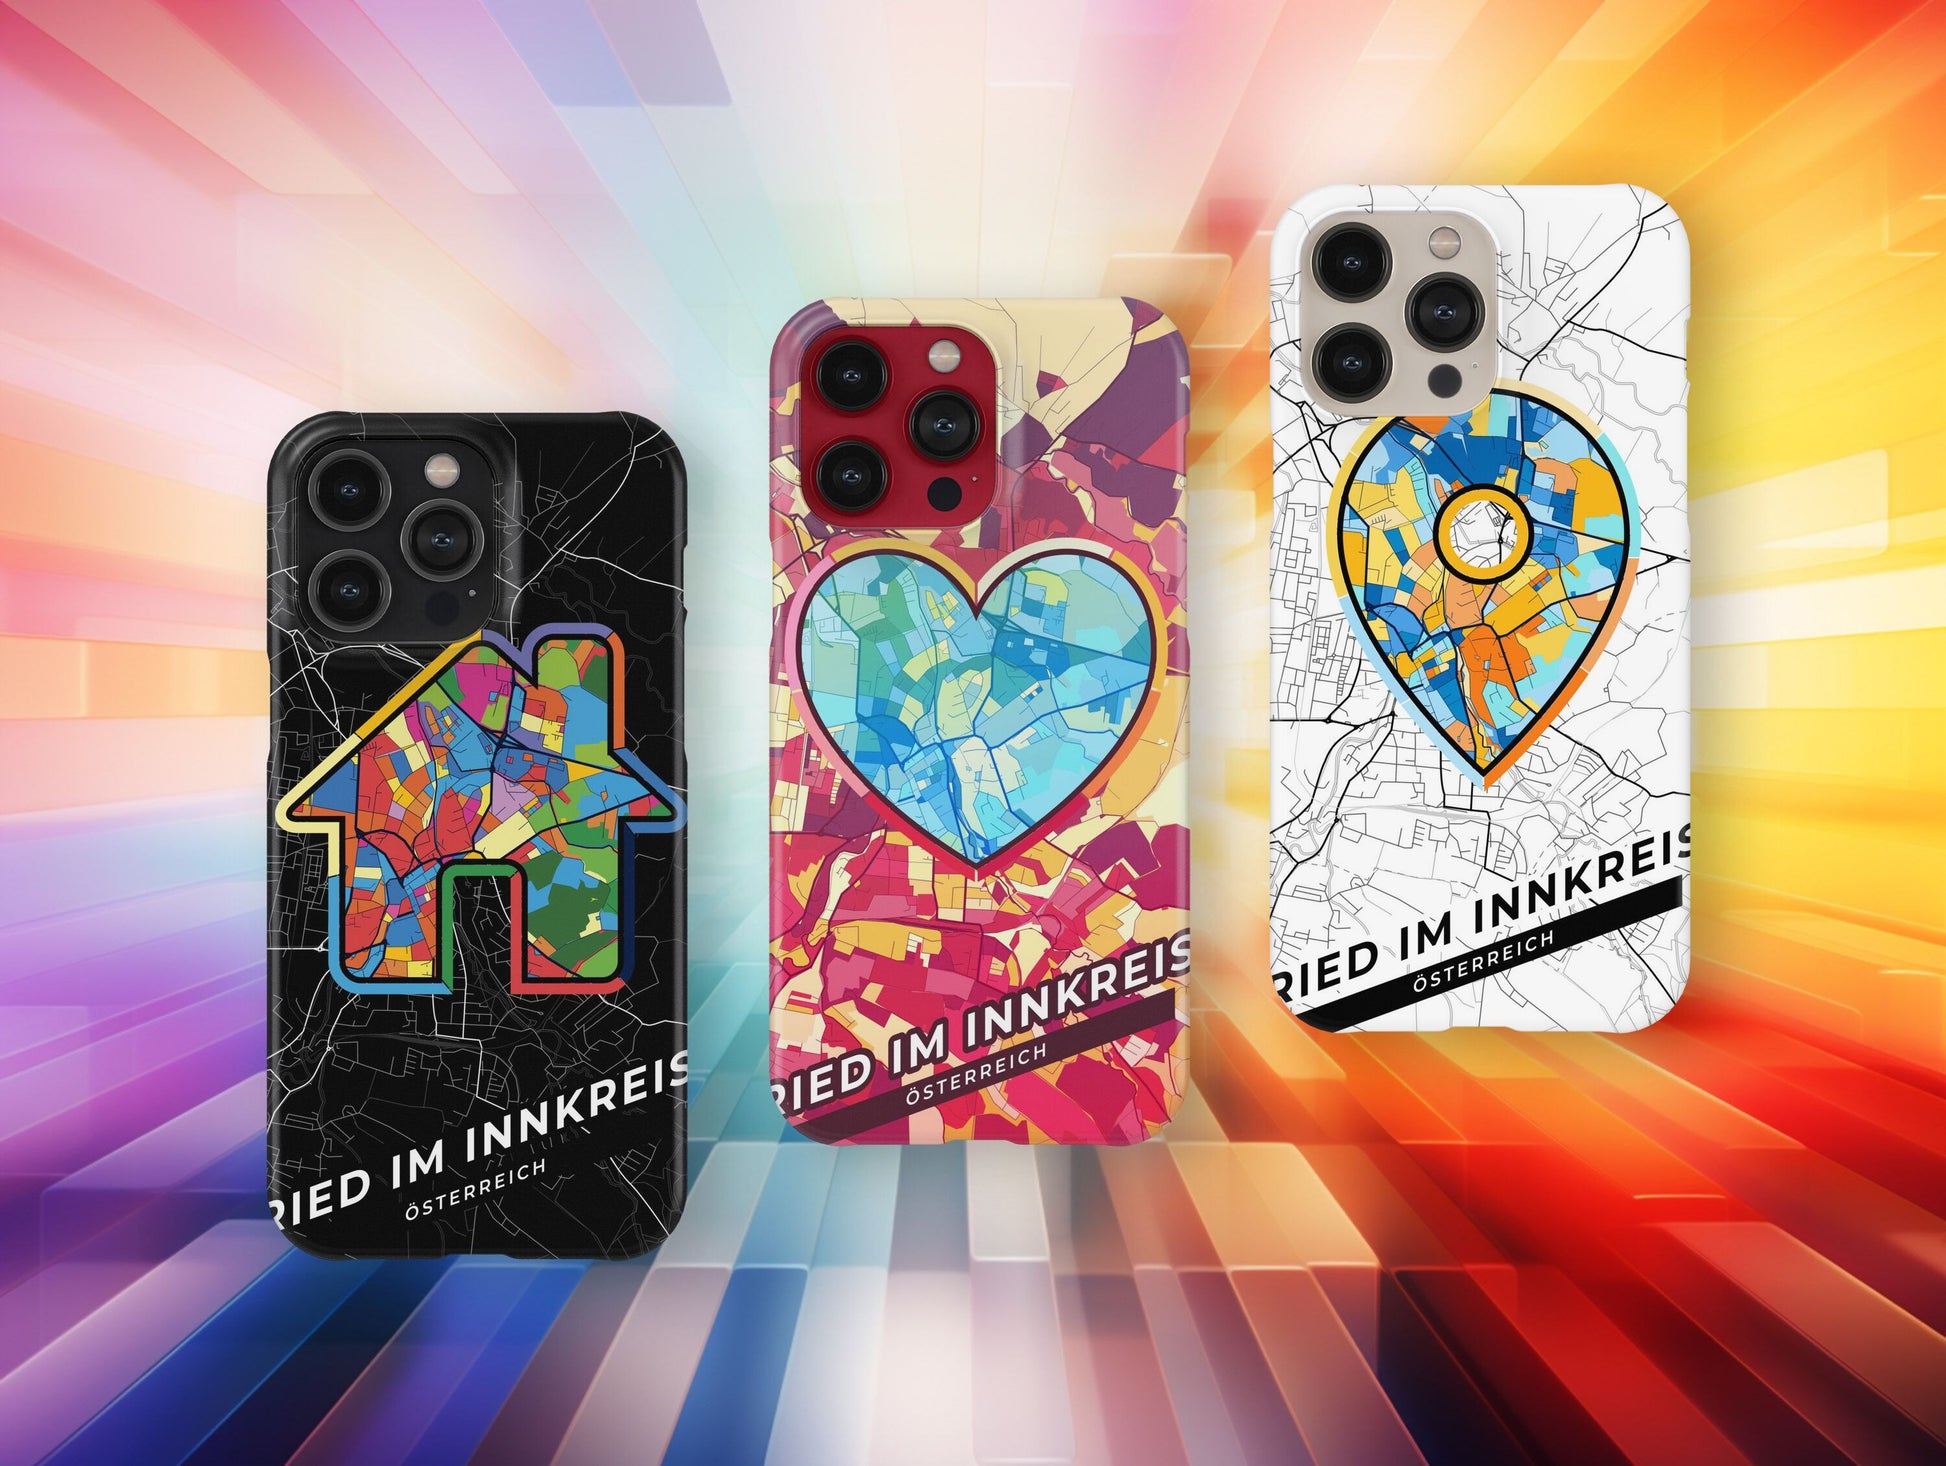 Ried Im Innkreis Österreich slim phone case with colorful icon. Birthday, wedding or housewarming gift. Couple match cases.